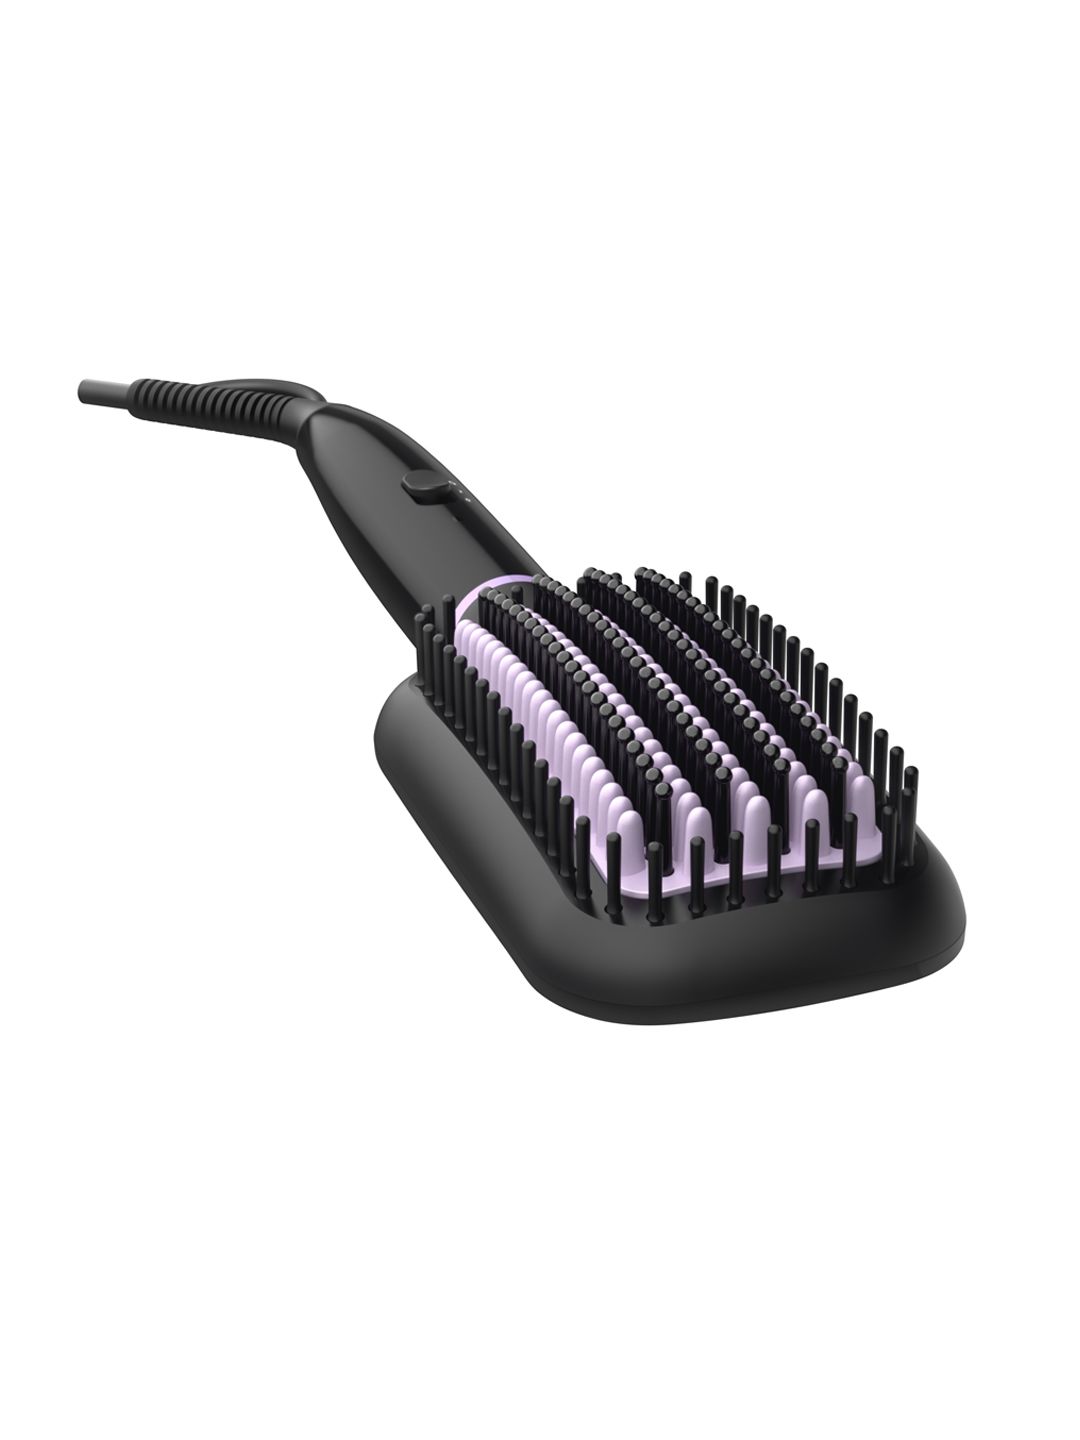 Philips BHH880/10 Heated Straightening Brush with ThermoProtect Technology - Black Price in India